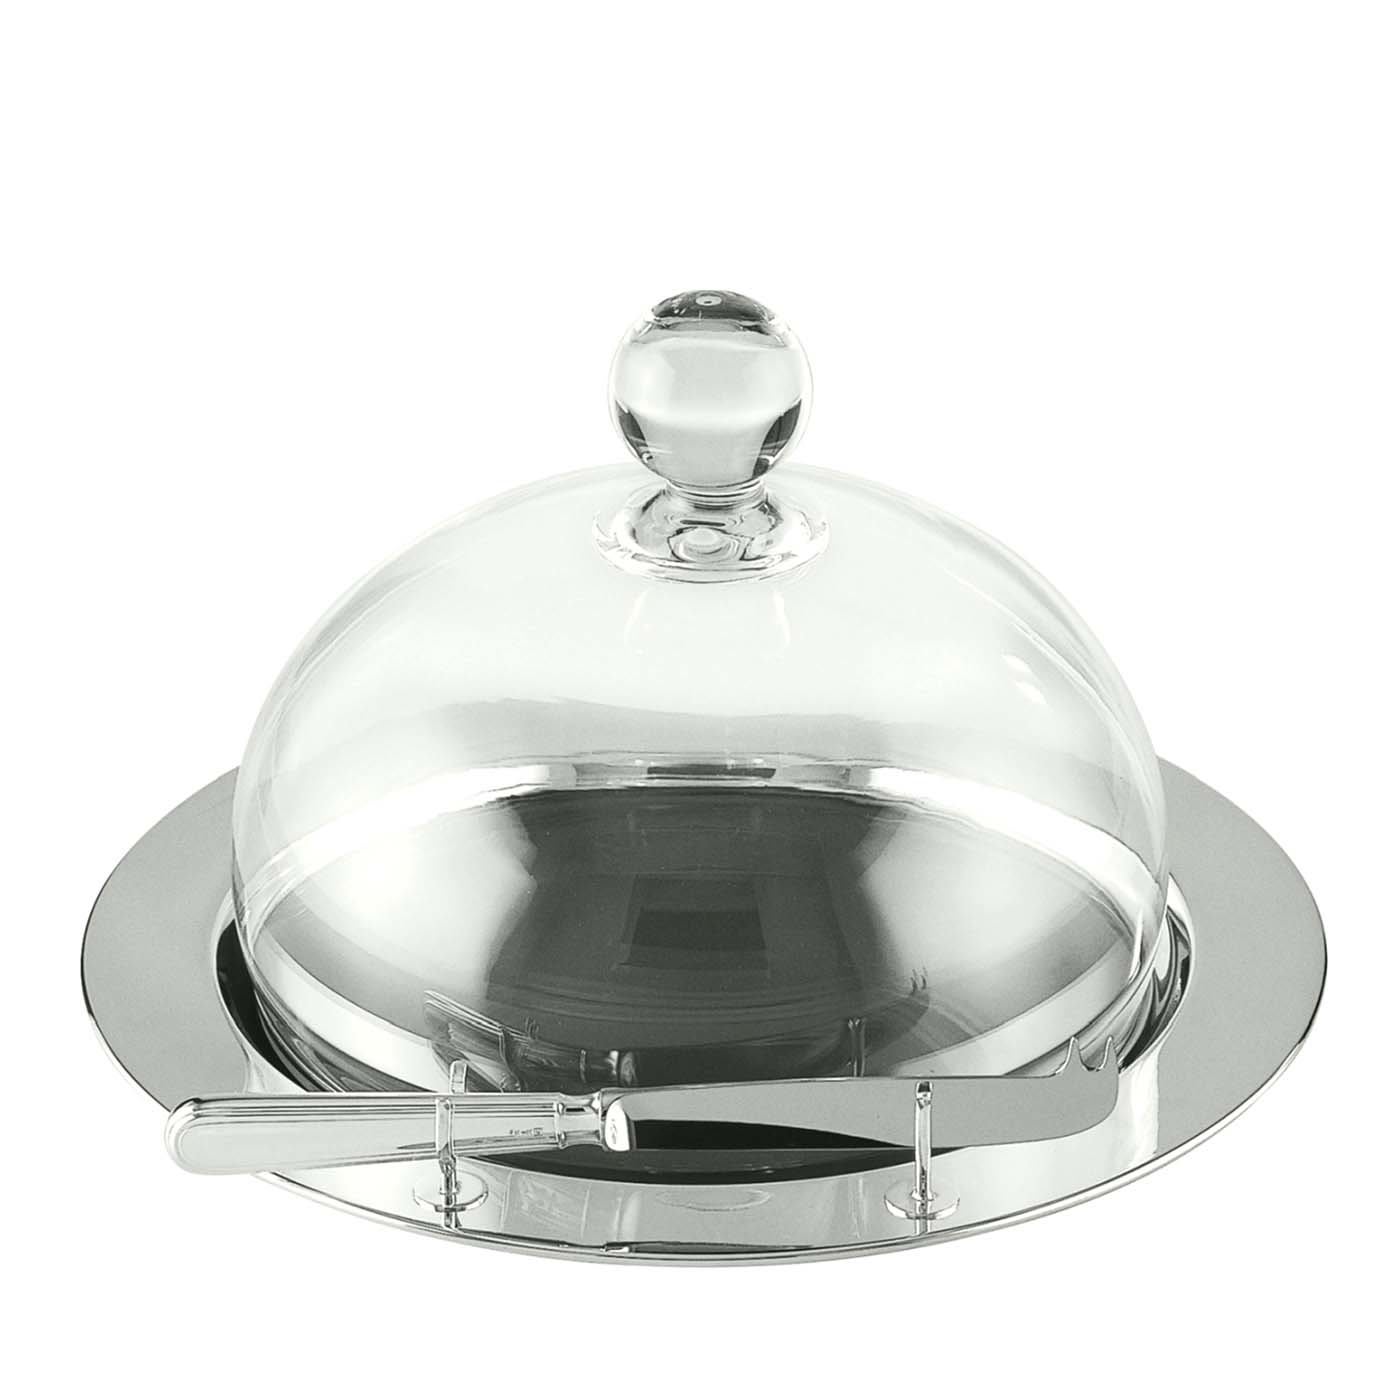 Essentia Cheese Tray with Crystal Dome Cover and Knife - Schiavon